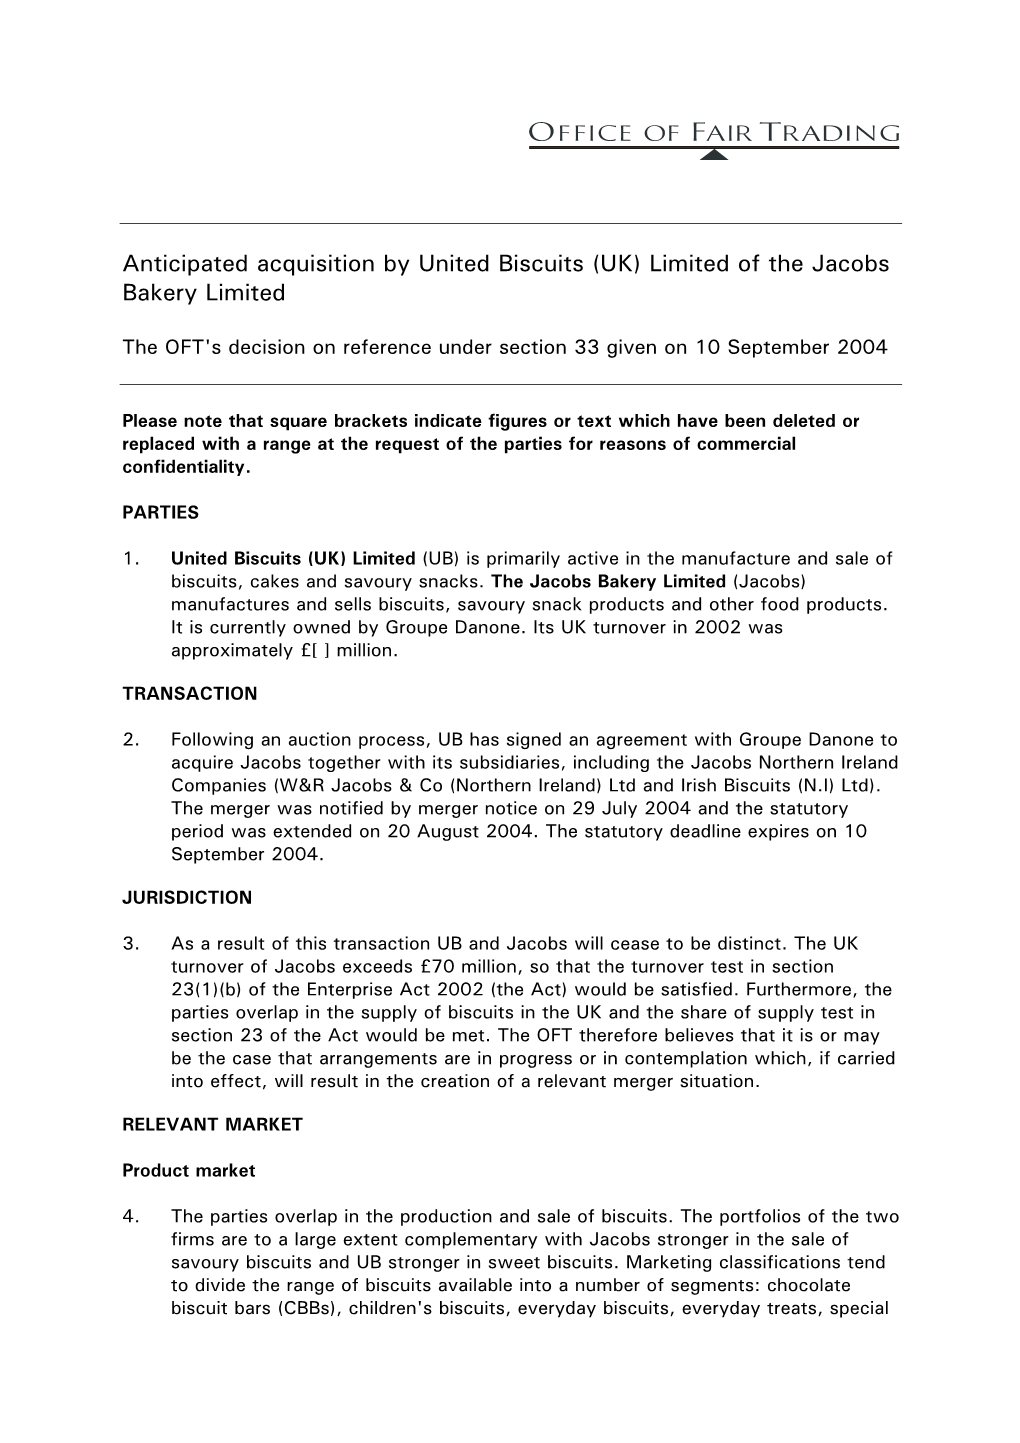 Anticipatedacquisition by United Biscuits (UK) Limited of the Jacobs